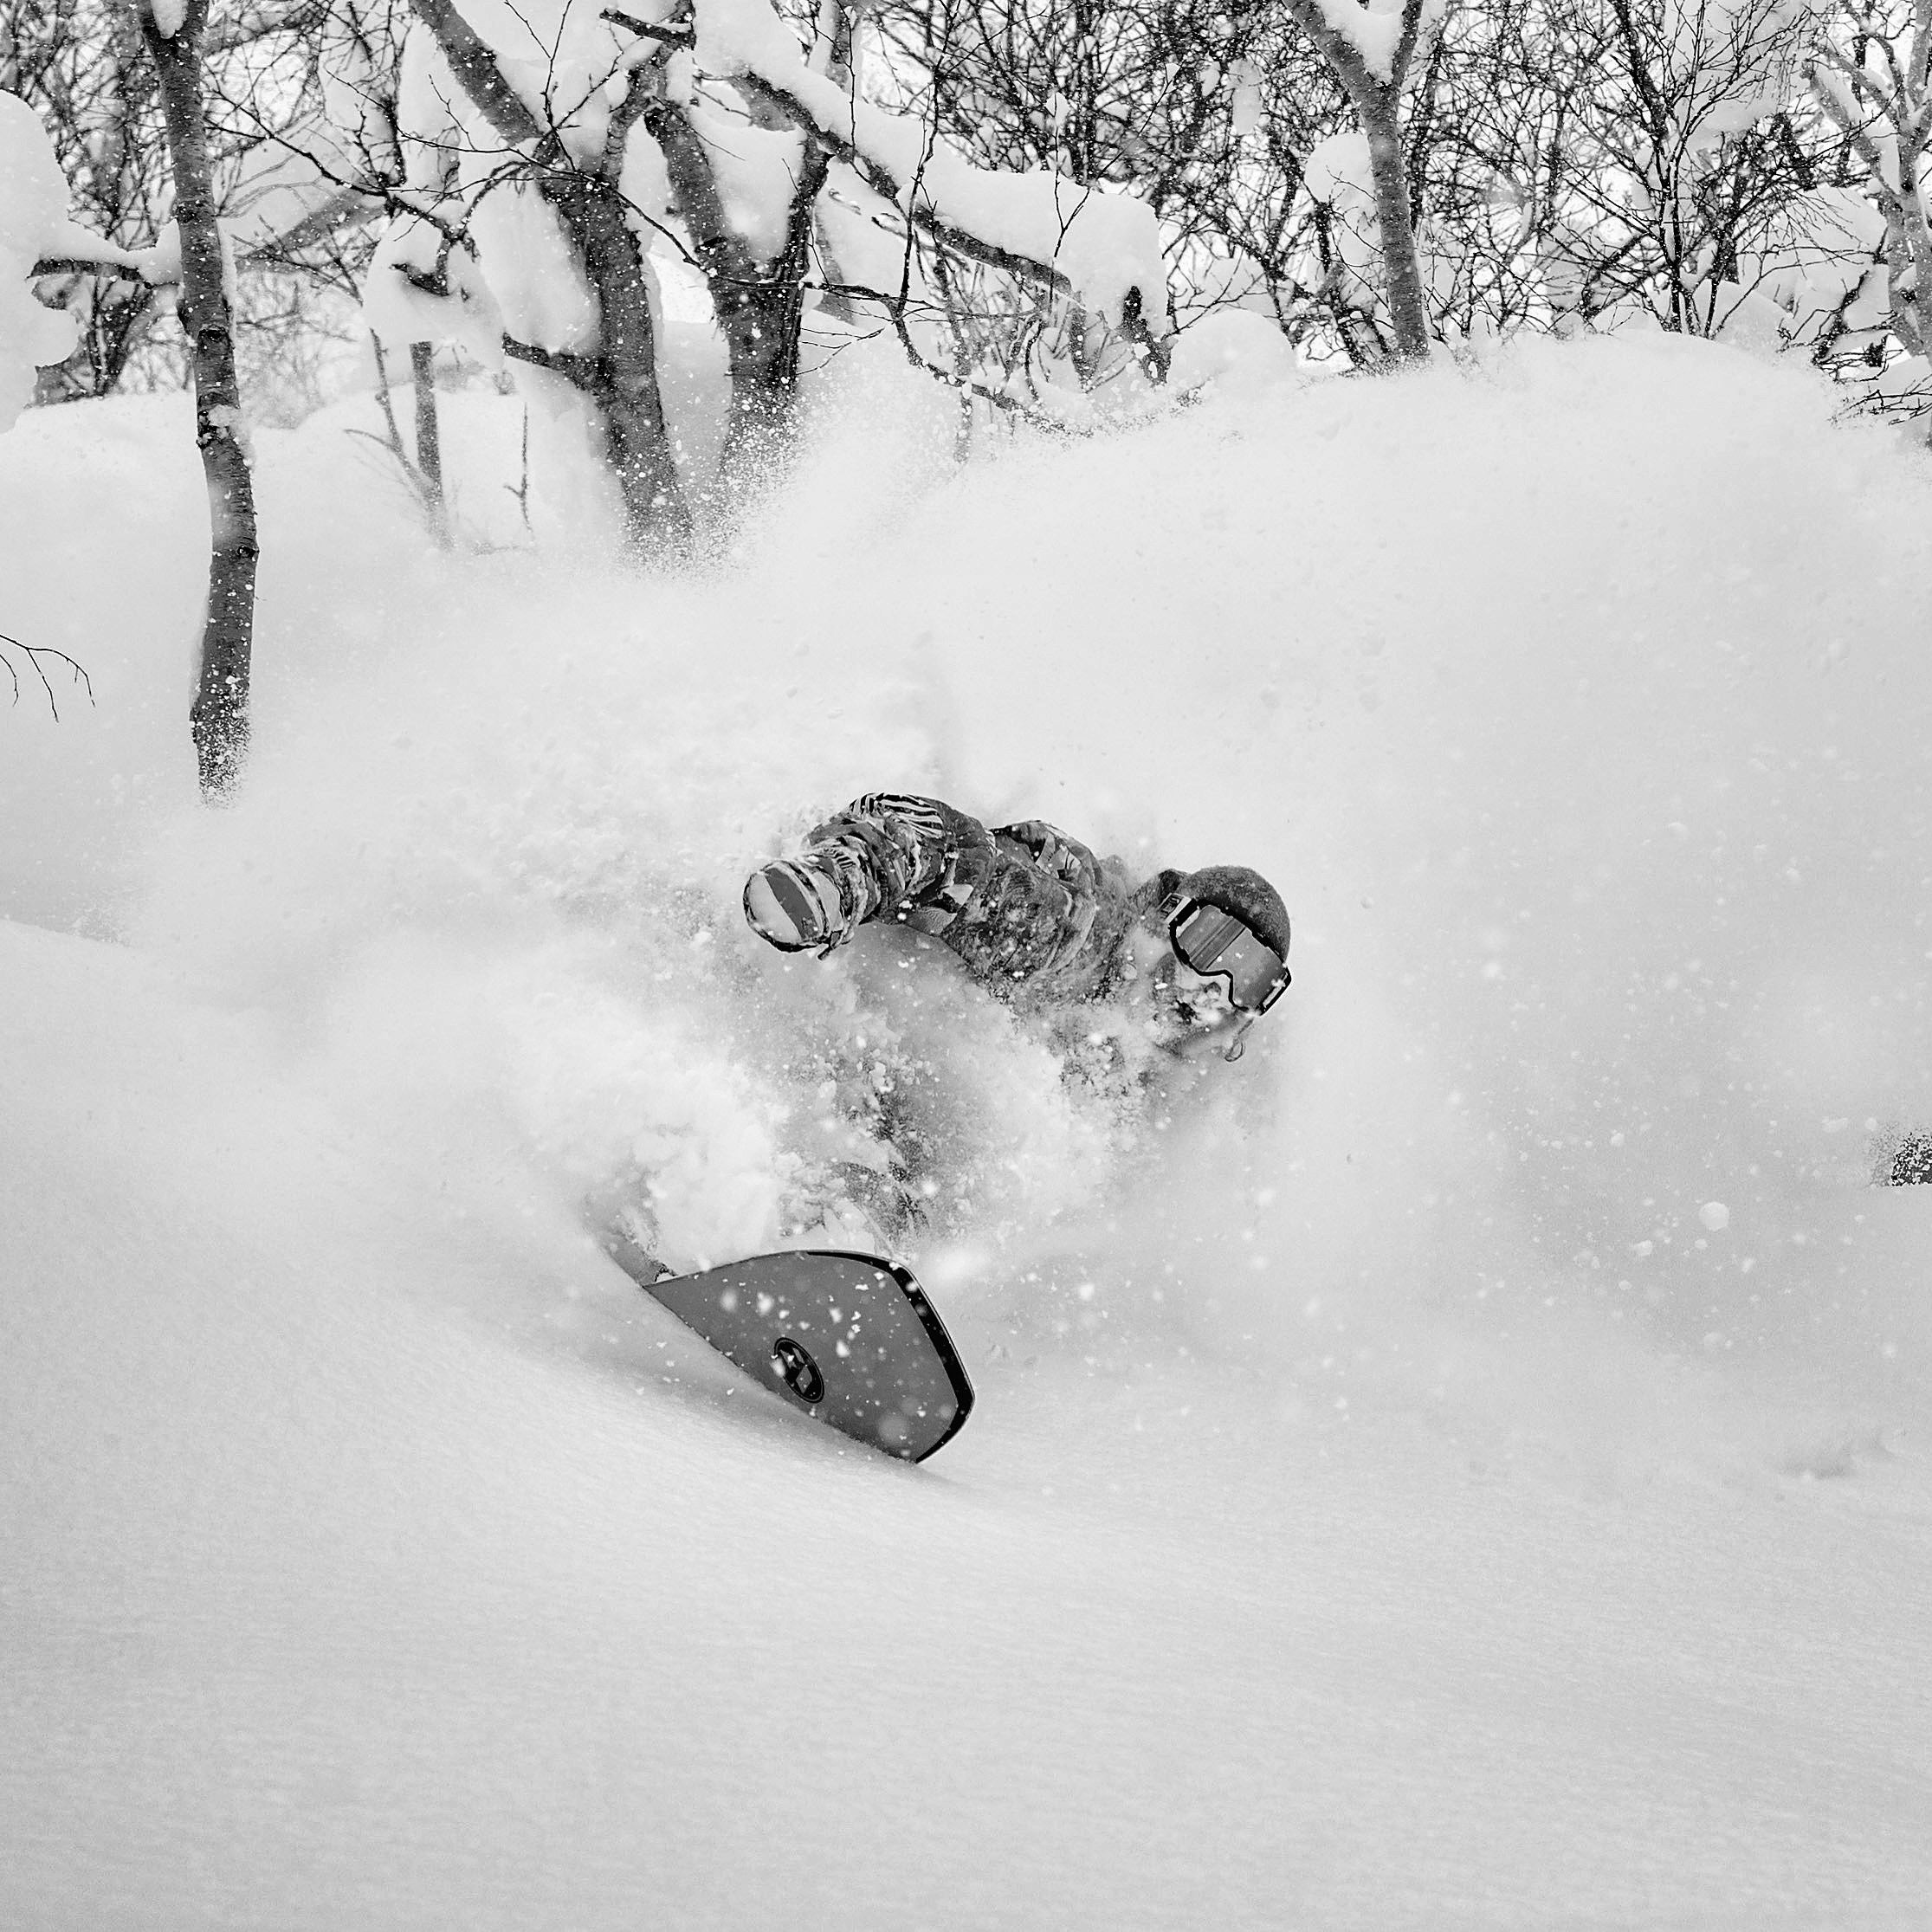 BACKCOUNTRY / BELOW TREE LINE - Surfing virgin pow in the woods is what I'm living for.